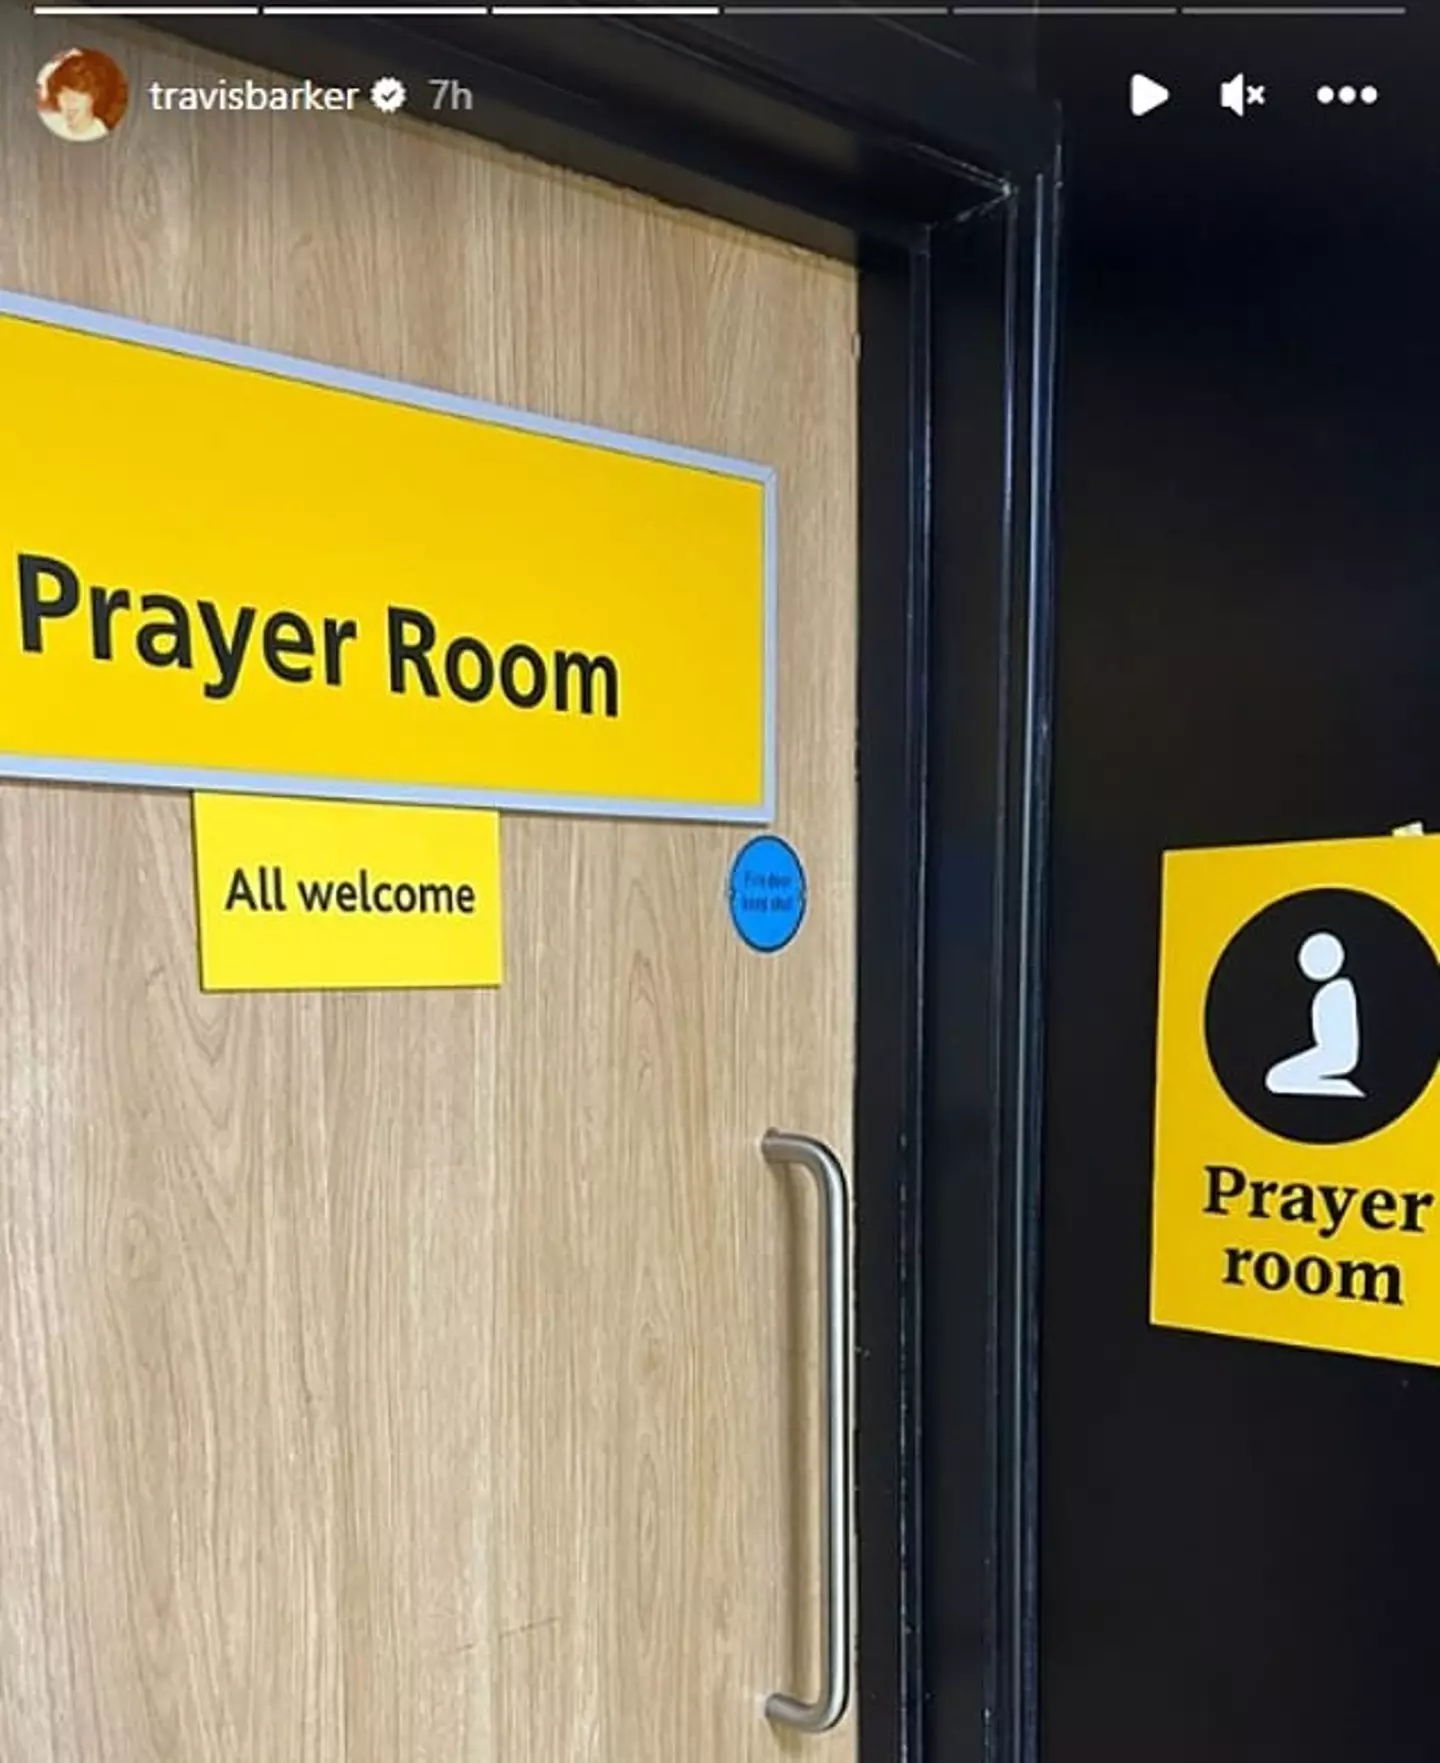 The entrance to the prayer room.